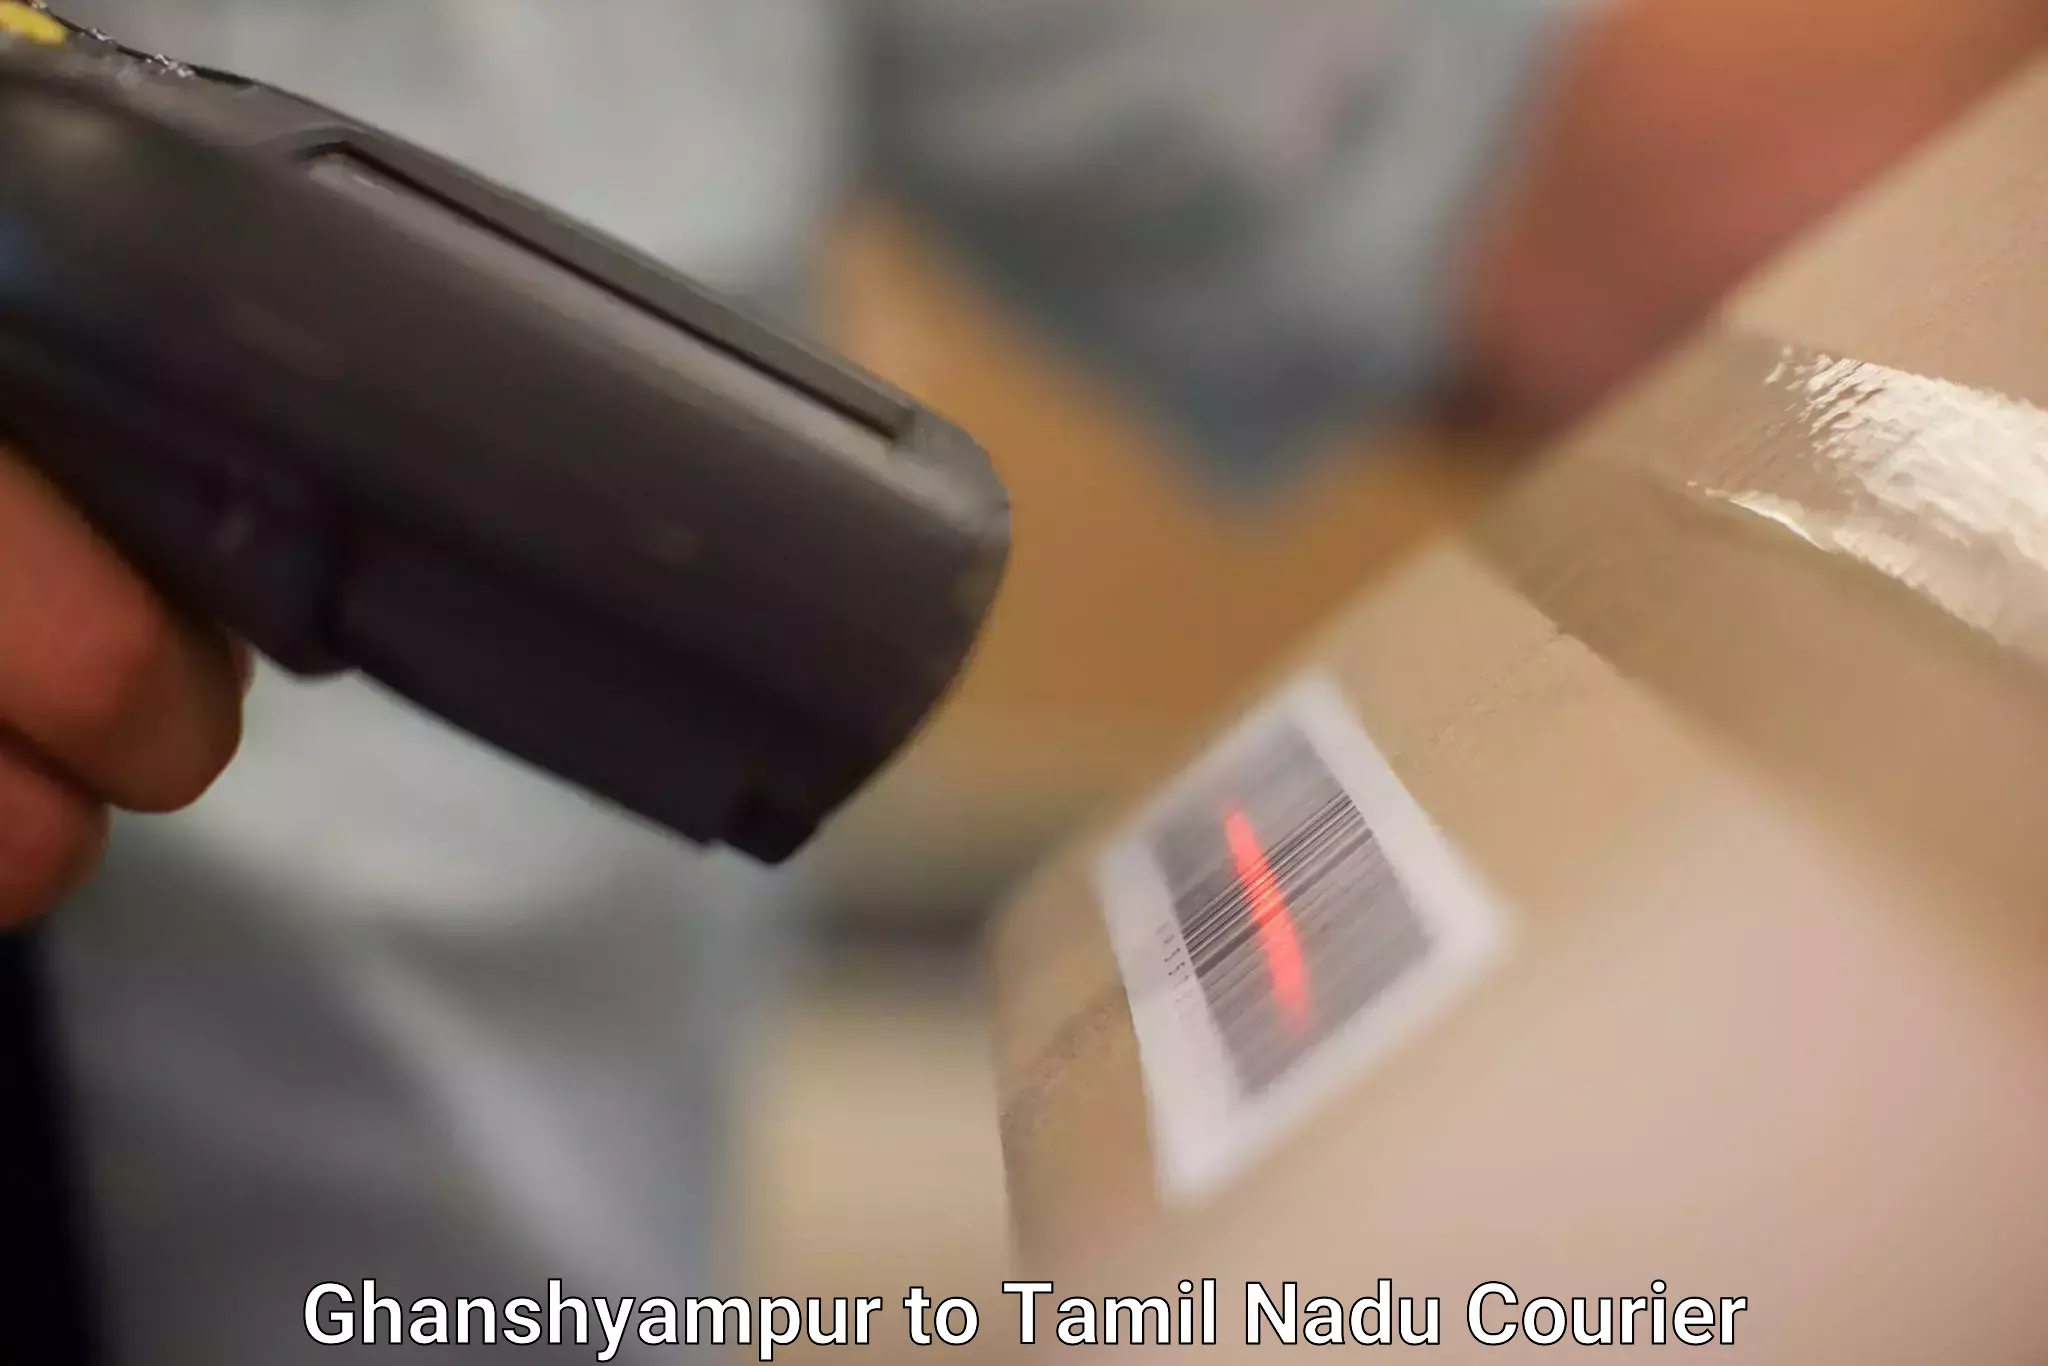 Multi-service courier options Ghanshyampur to Tiruchi